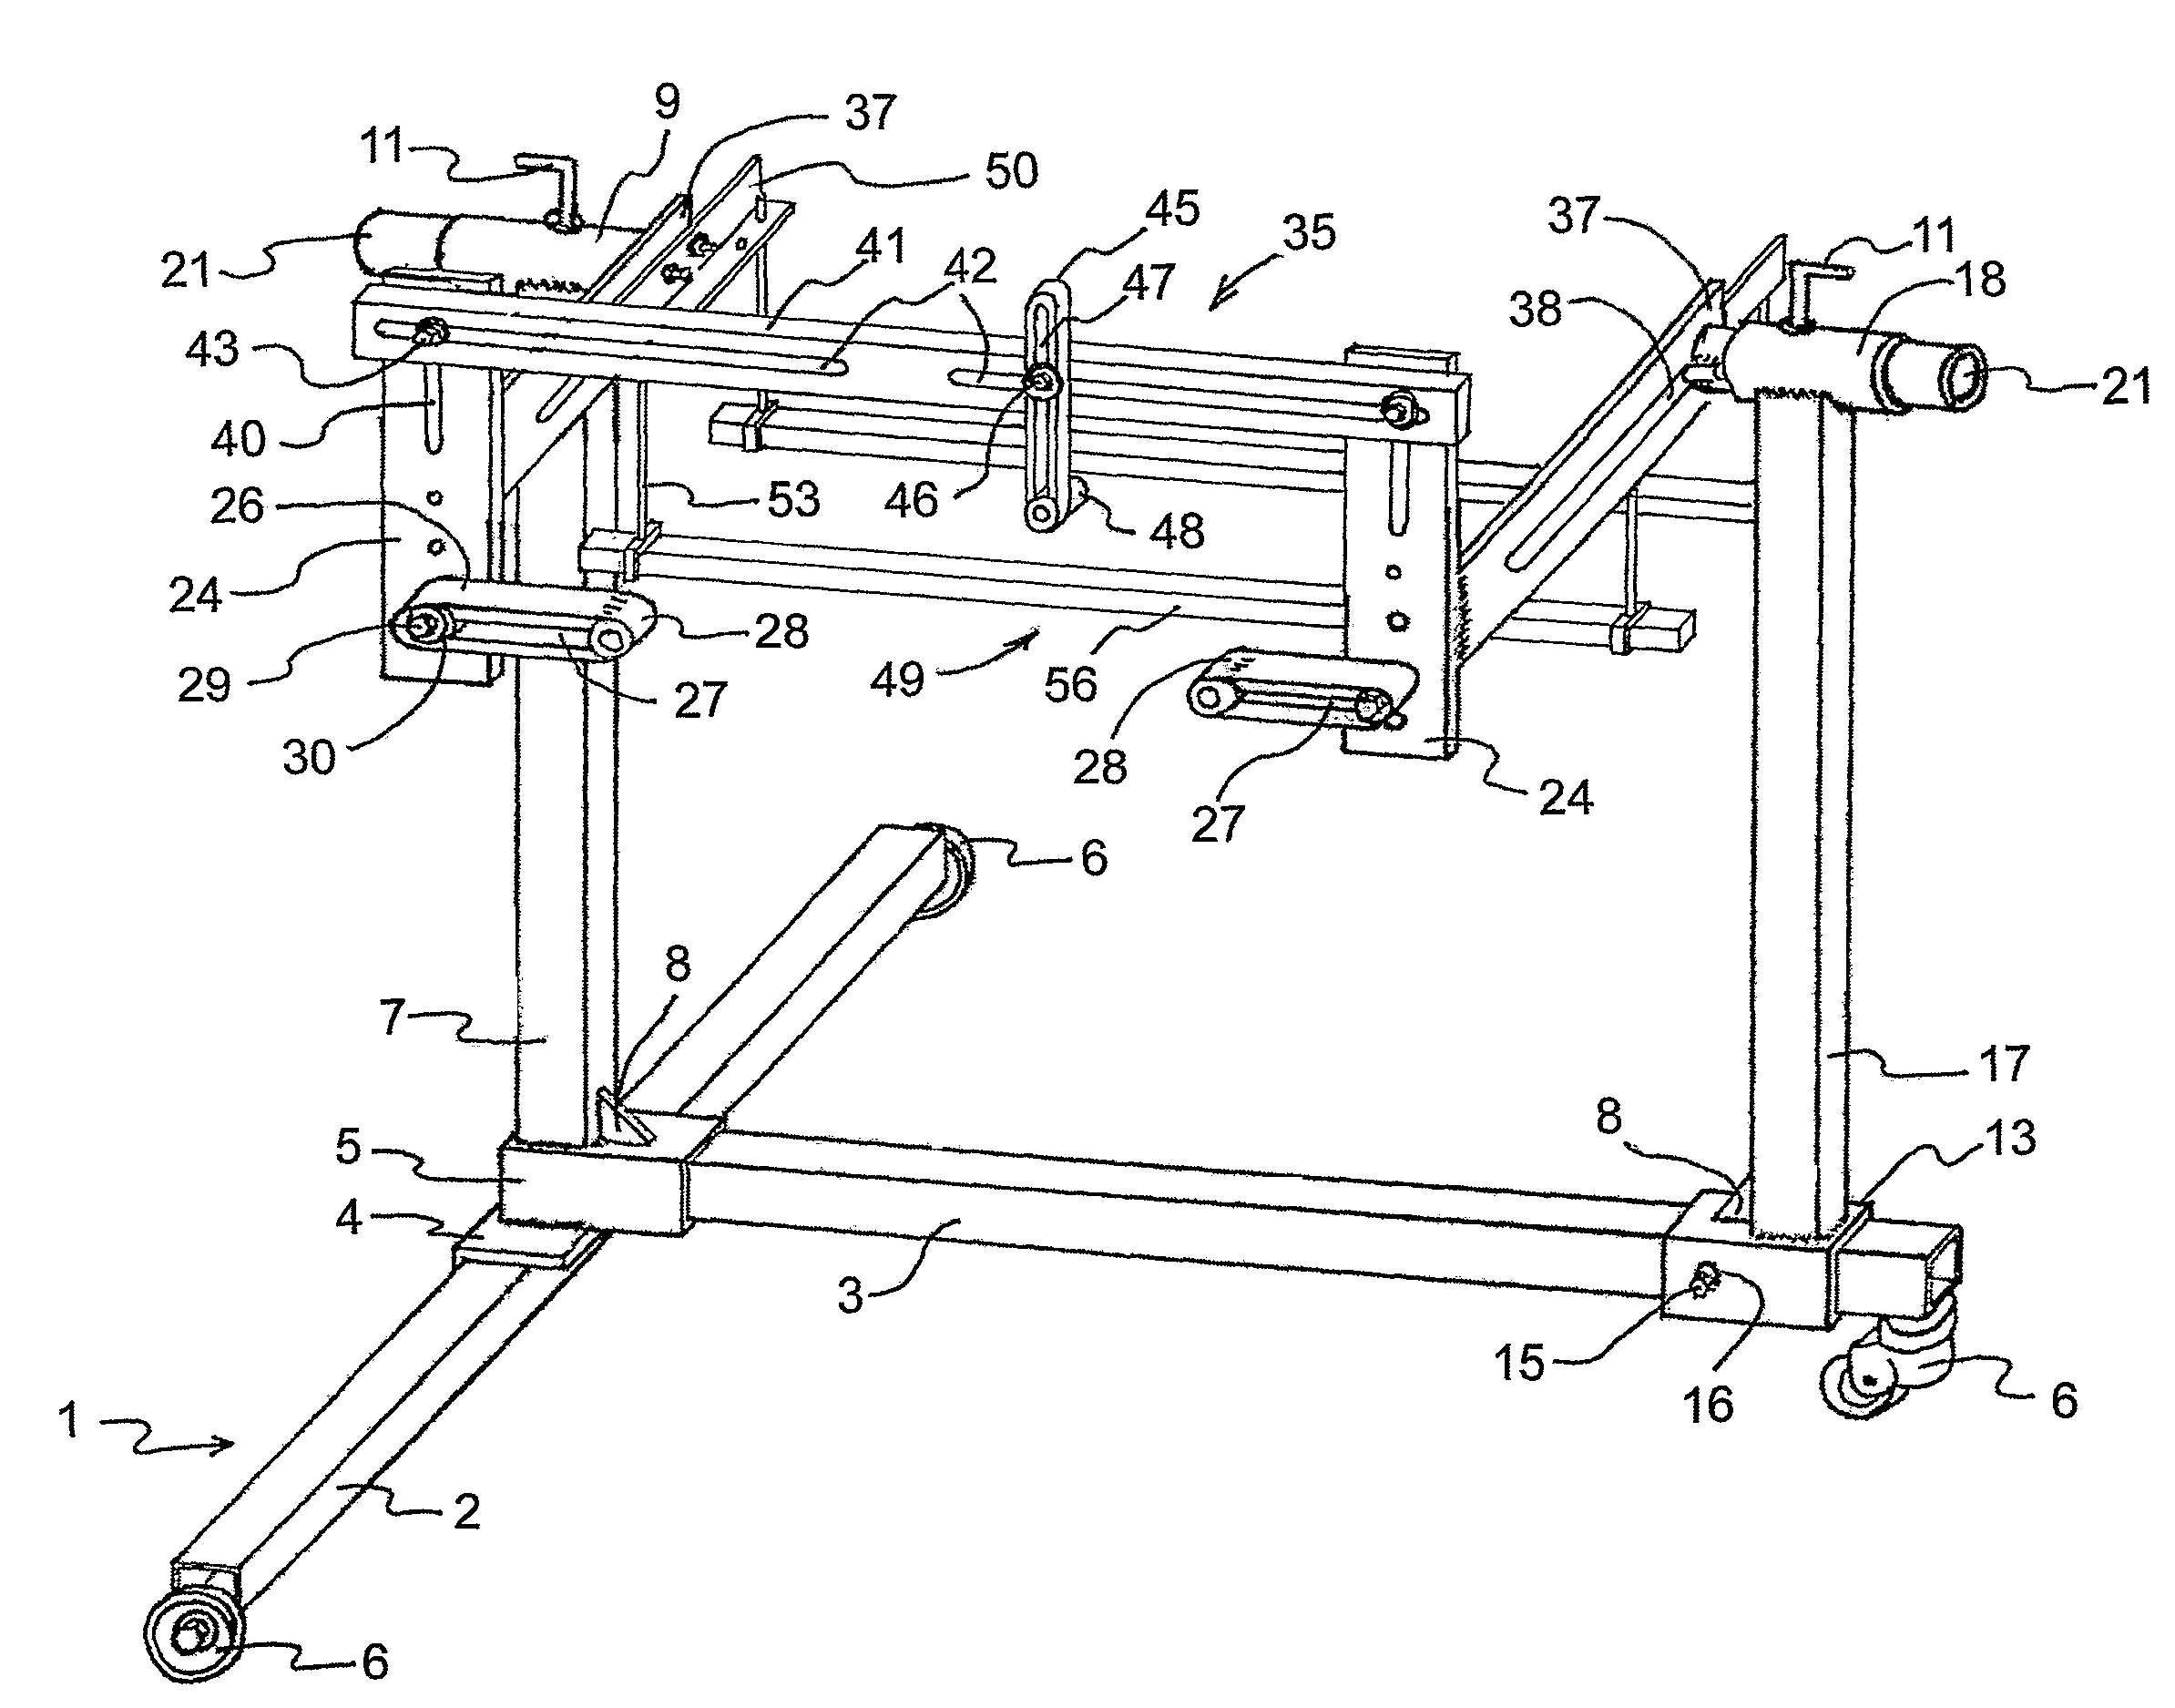 Universal vehicle engine, gearbox and like stand